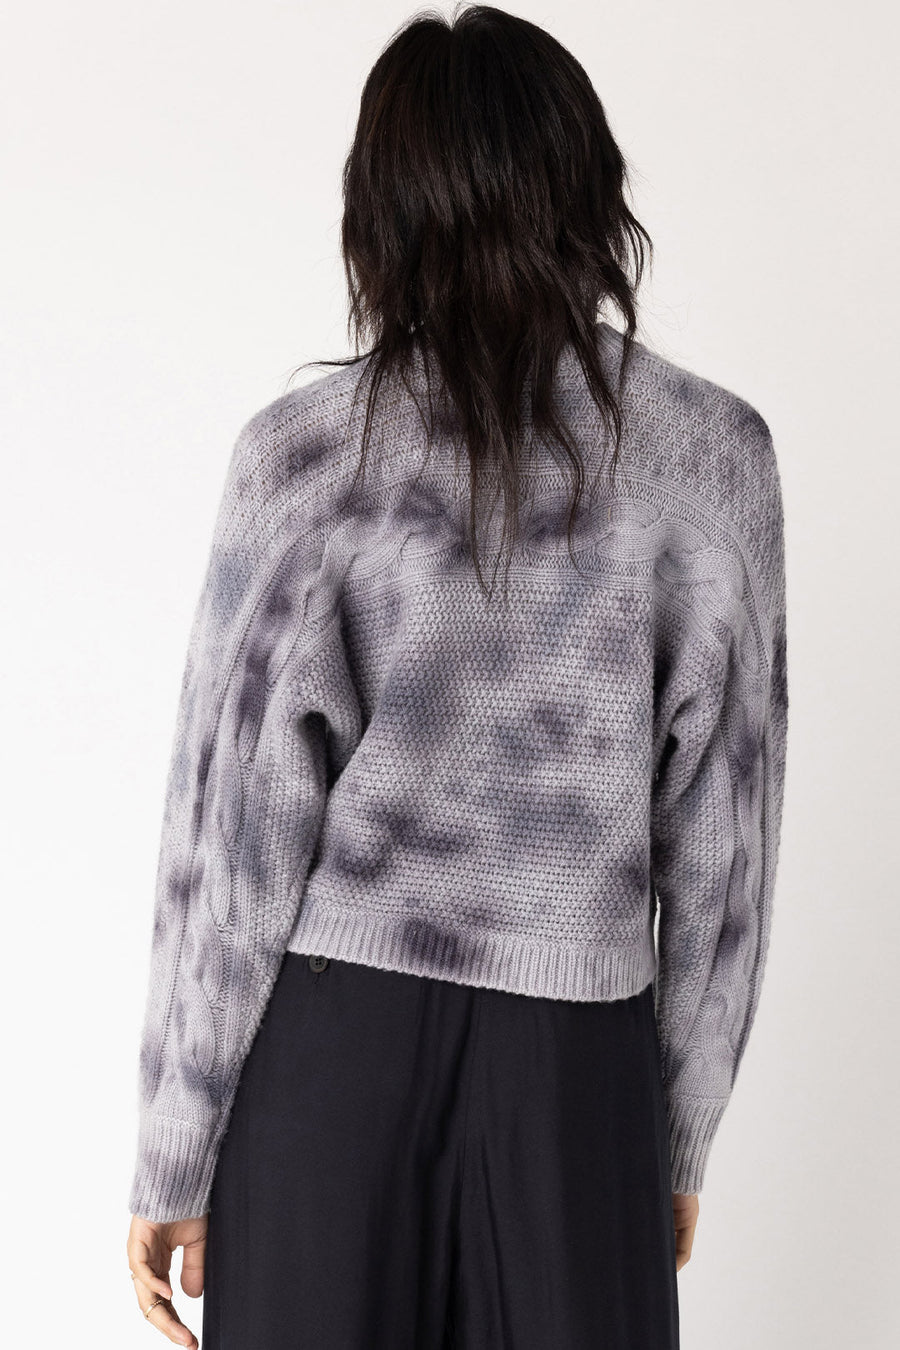 WATERCOLOR CASHMERE SWEATER, STORM - Burning Torch Online Boutique